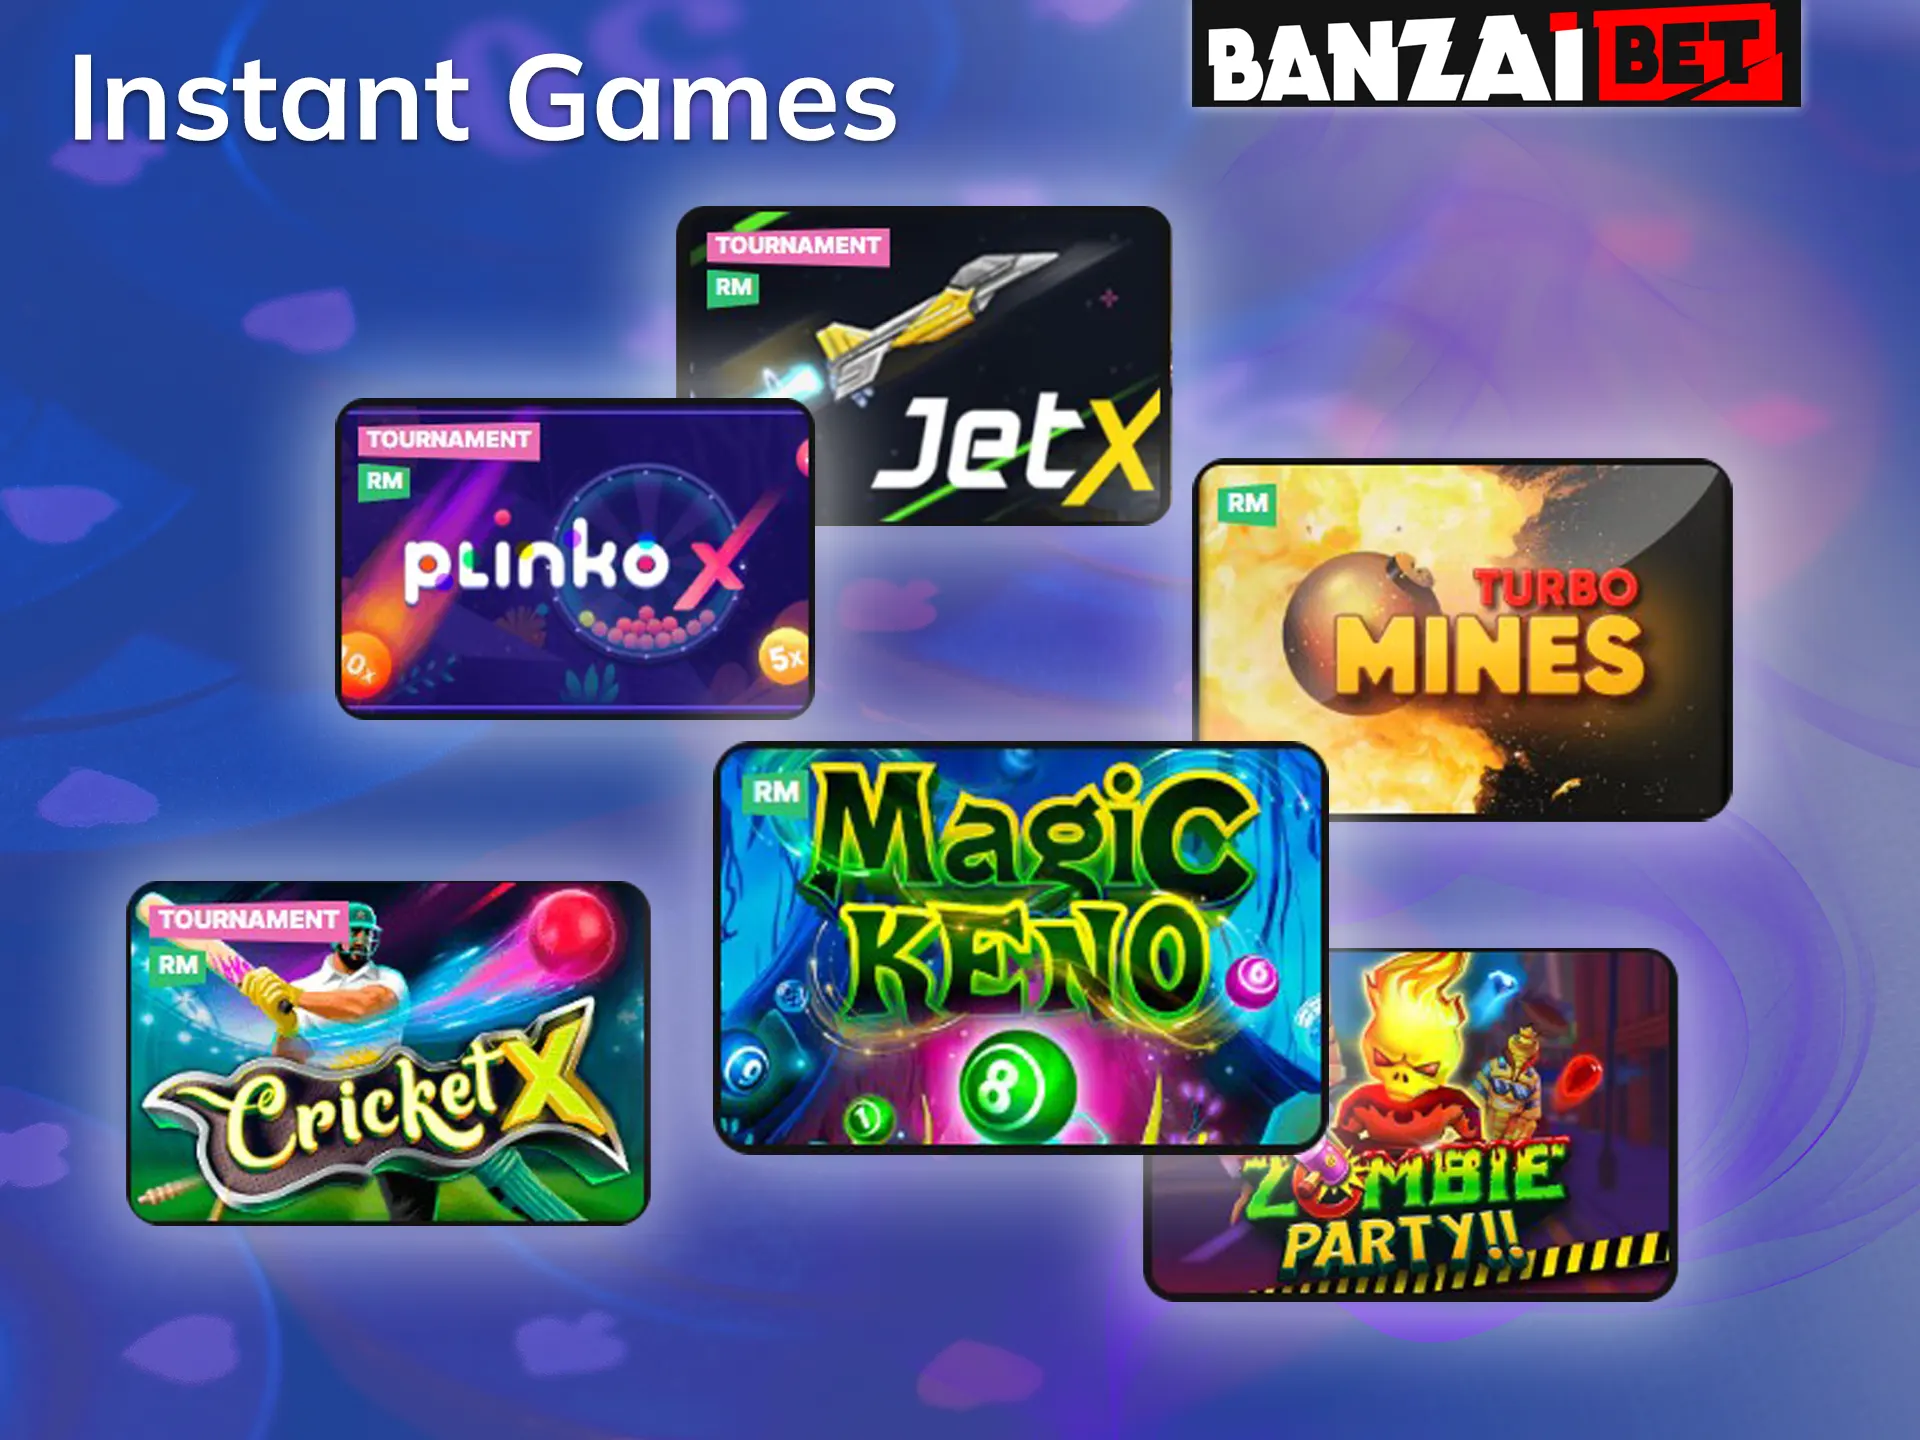 Check out the Instant Games section of the Banzai Bet online casino site.